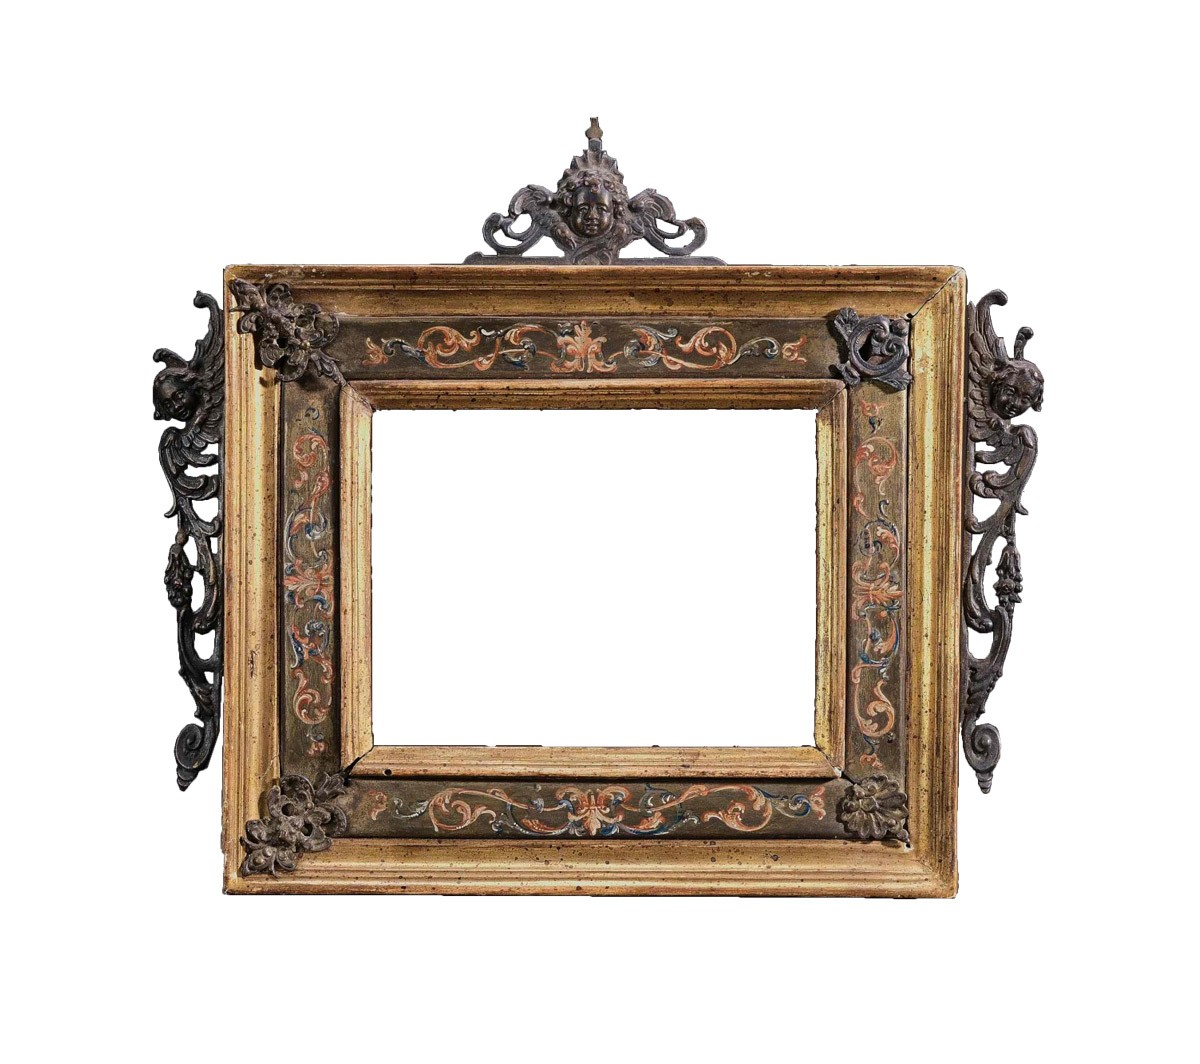 Original Norm jeg behøver Miniature Frame With Silvered Bronze Decorations And Paintings, Rome 17th -  Ref.102728